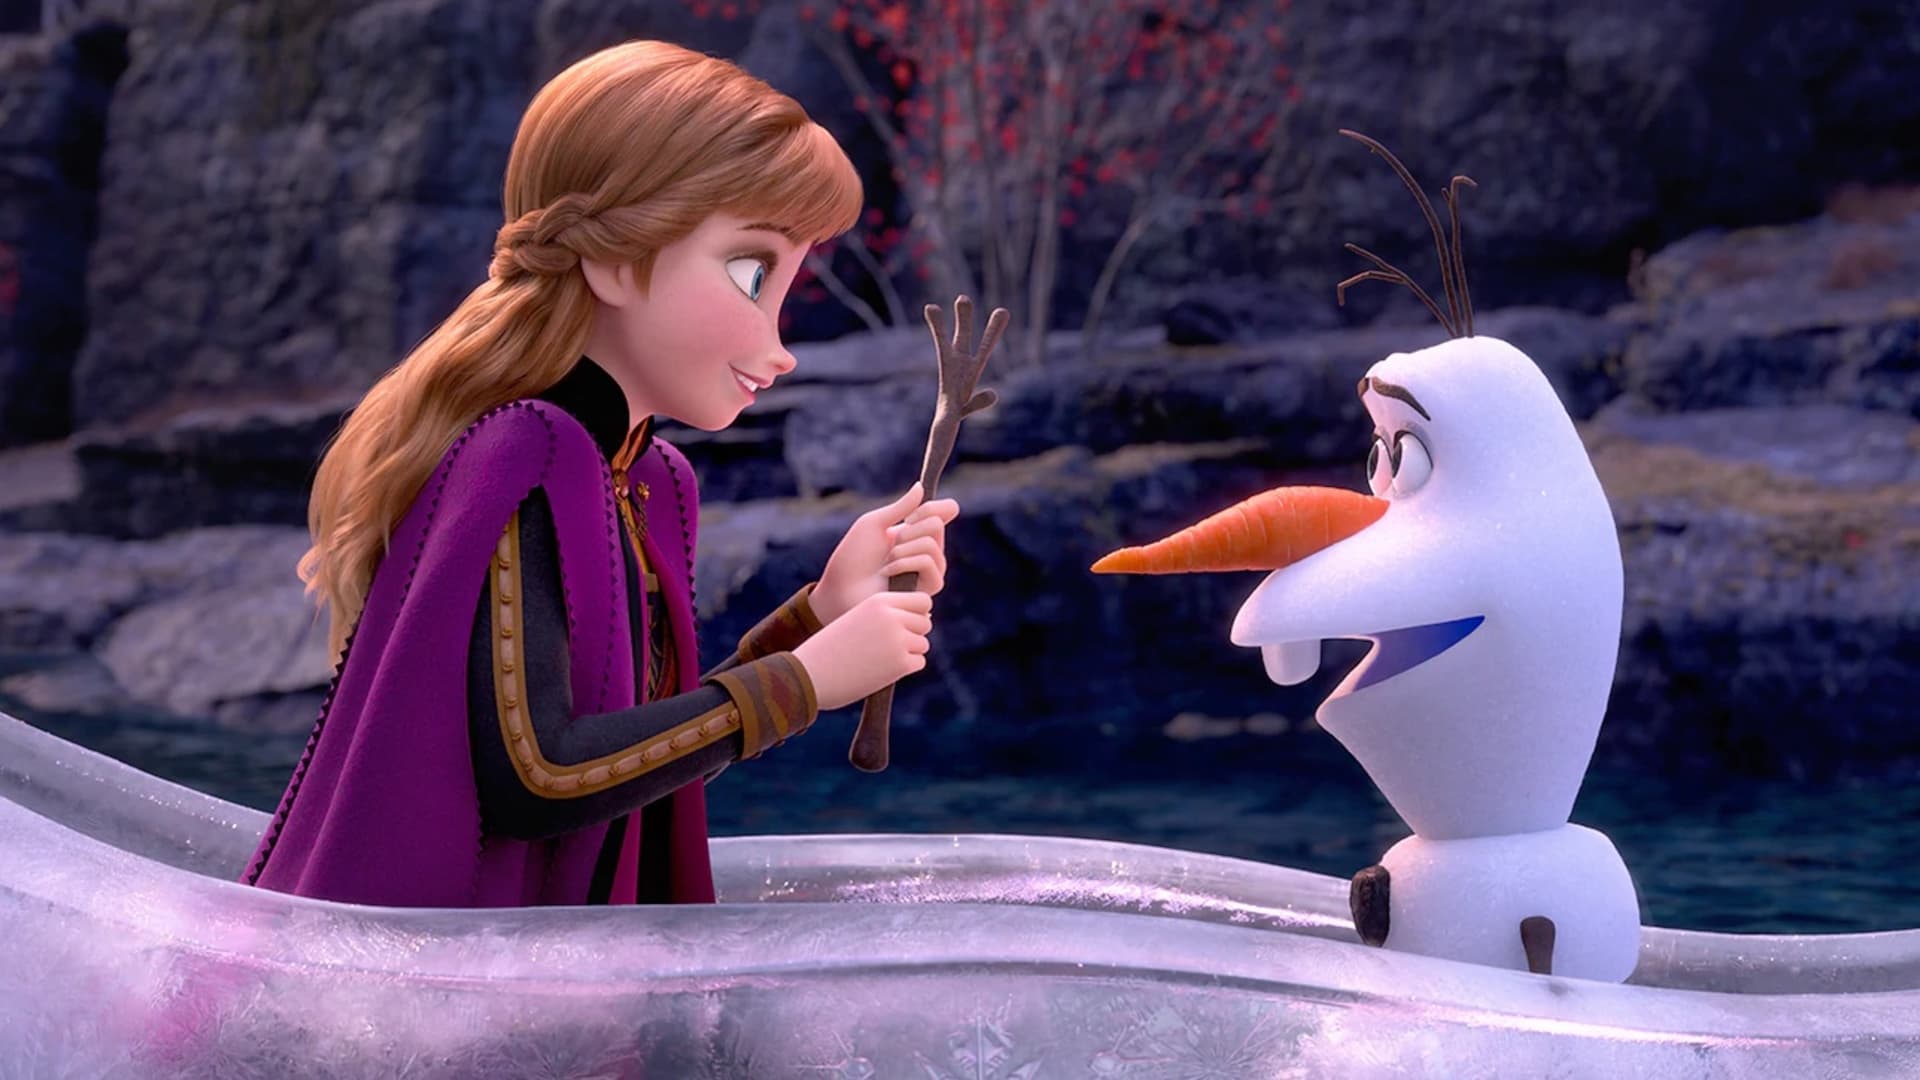 Frozen 2' is now the highest grossing animated movie of all time